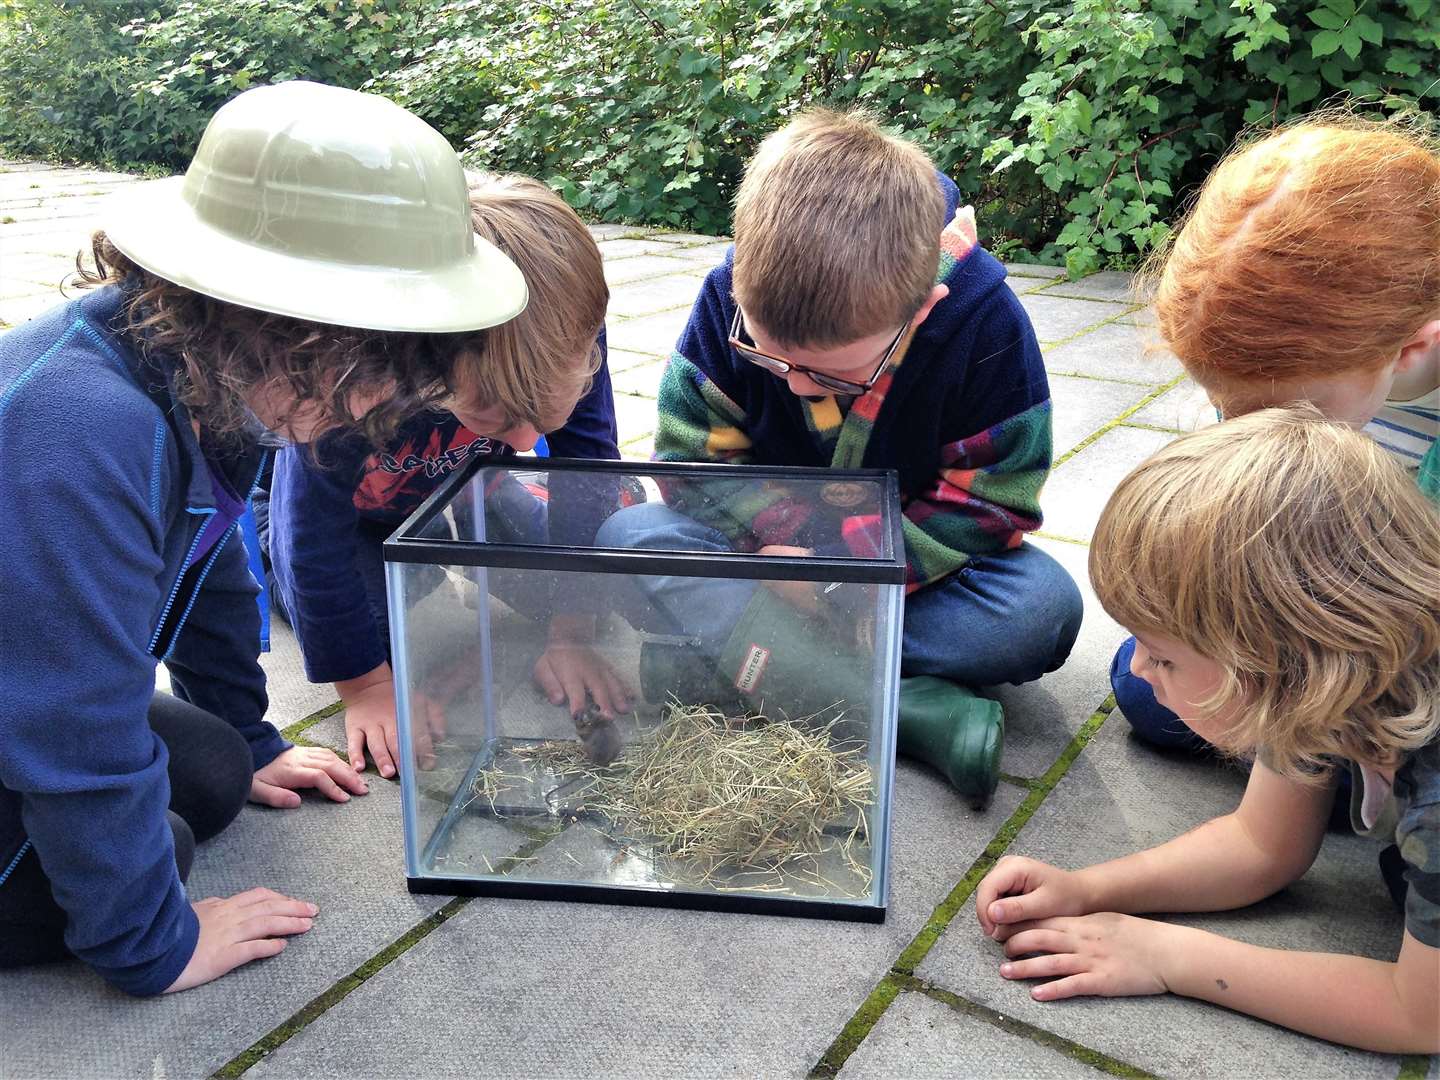 Children examine small animals that have been trapped.